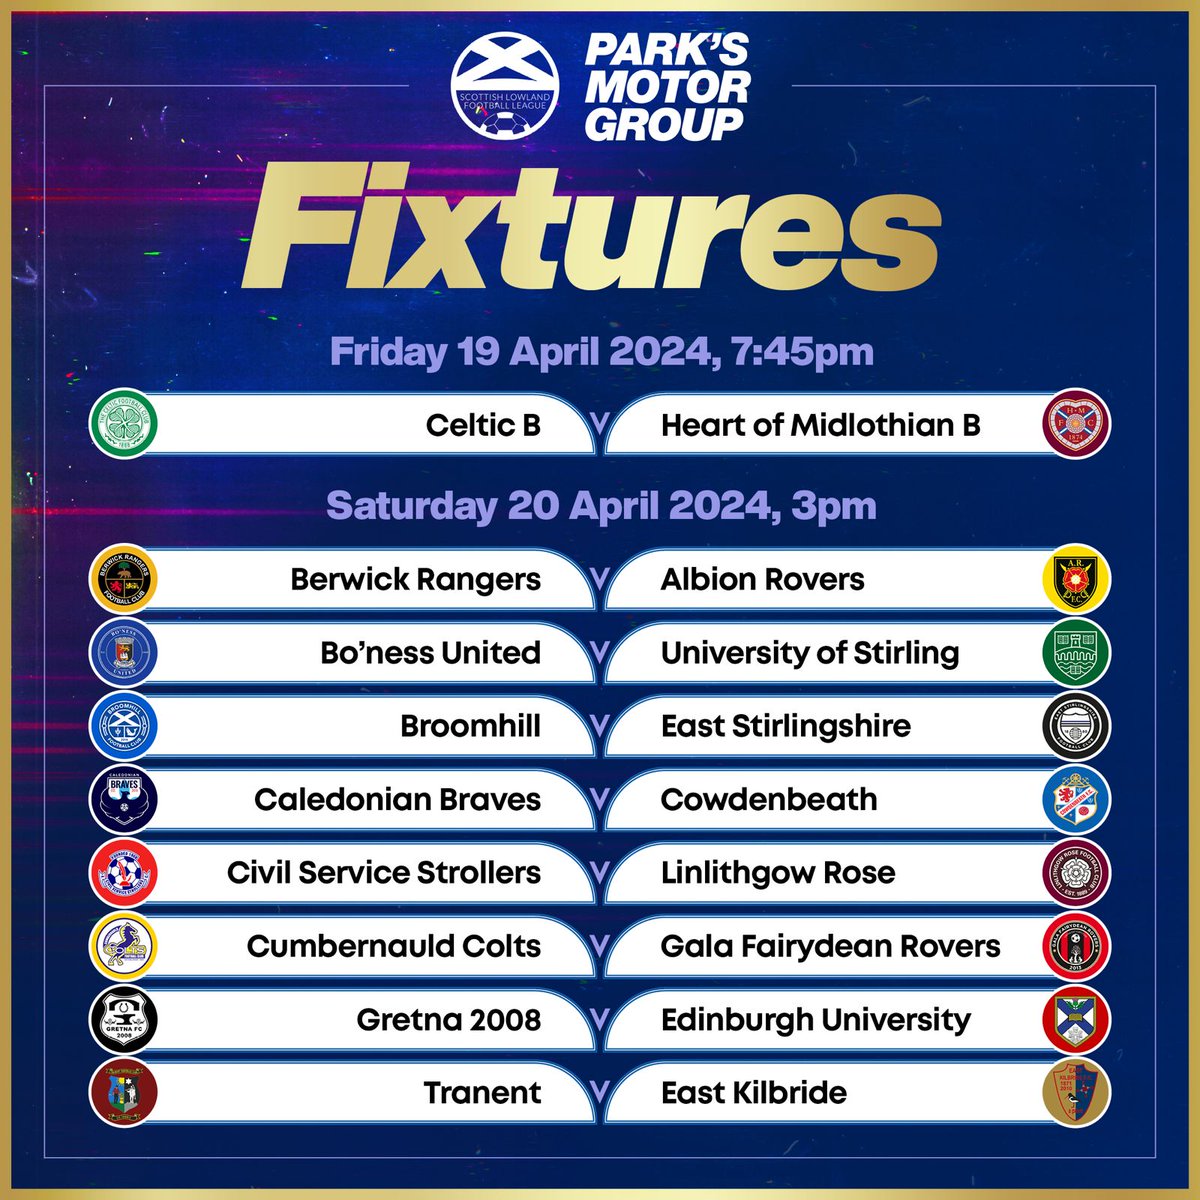 𝑻𝒉𝒆 𝑪𝒍𝒐𝒔𝒊𝒏𝒈 𝑾𝒆𝒆𝒌𝒆𝒏𝒅 23/24 comes to an end this weekend 😭 A massive clash between @GretnaFC2008 & @EdinburghUniAFC - with both sitting at the bottom of the table with nine points! 🤯